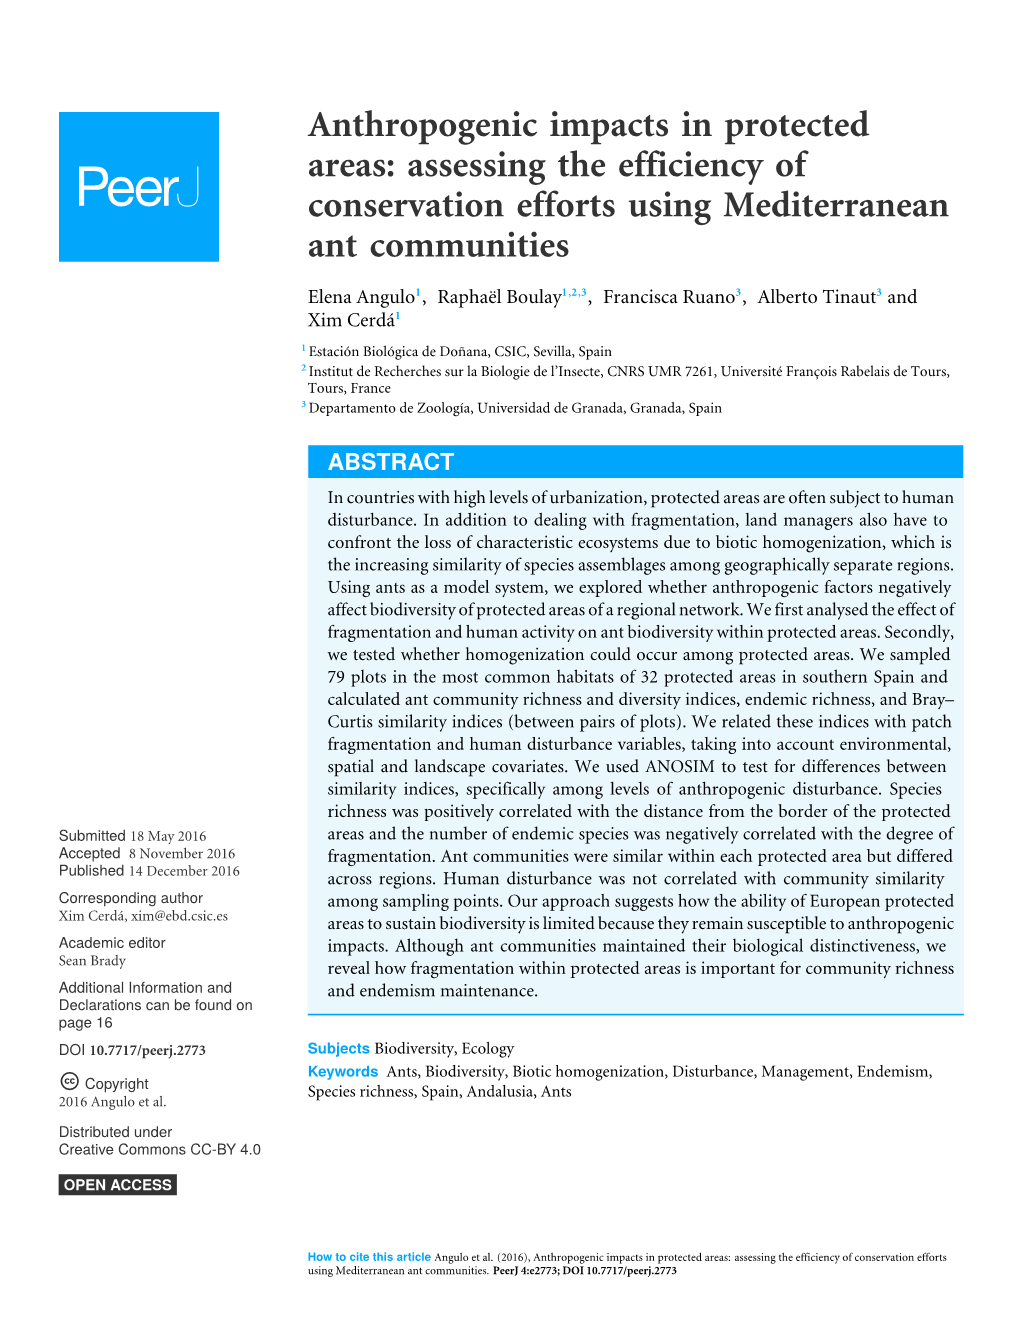 Anthropogenic Impacts in Protected Areas: Assessing the Efficiency of Conservation Efforts Using Mediterranean Ant Communities